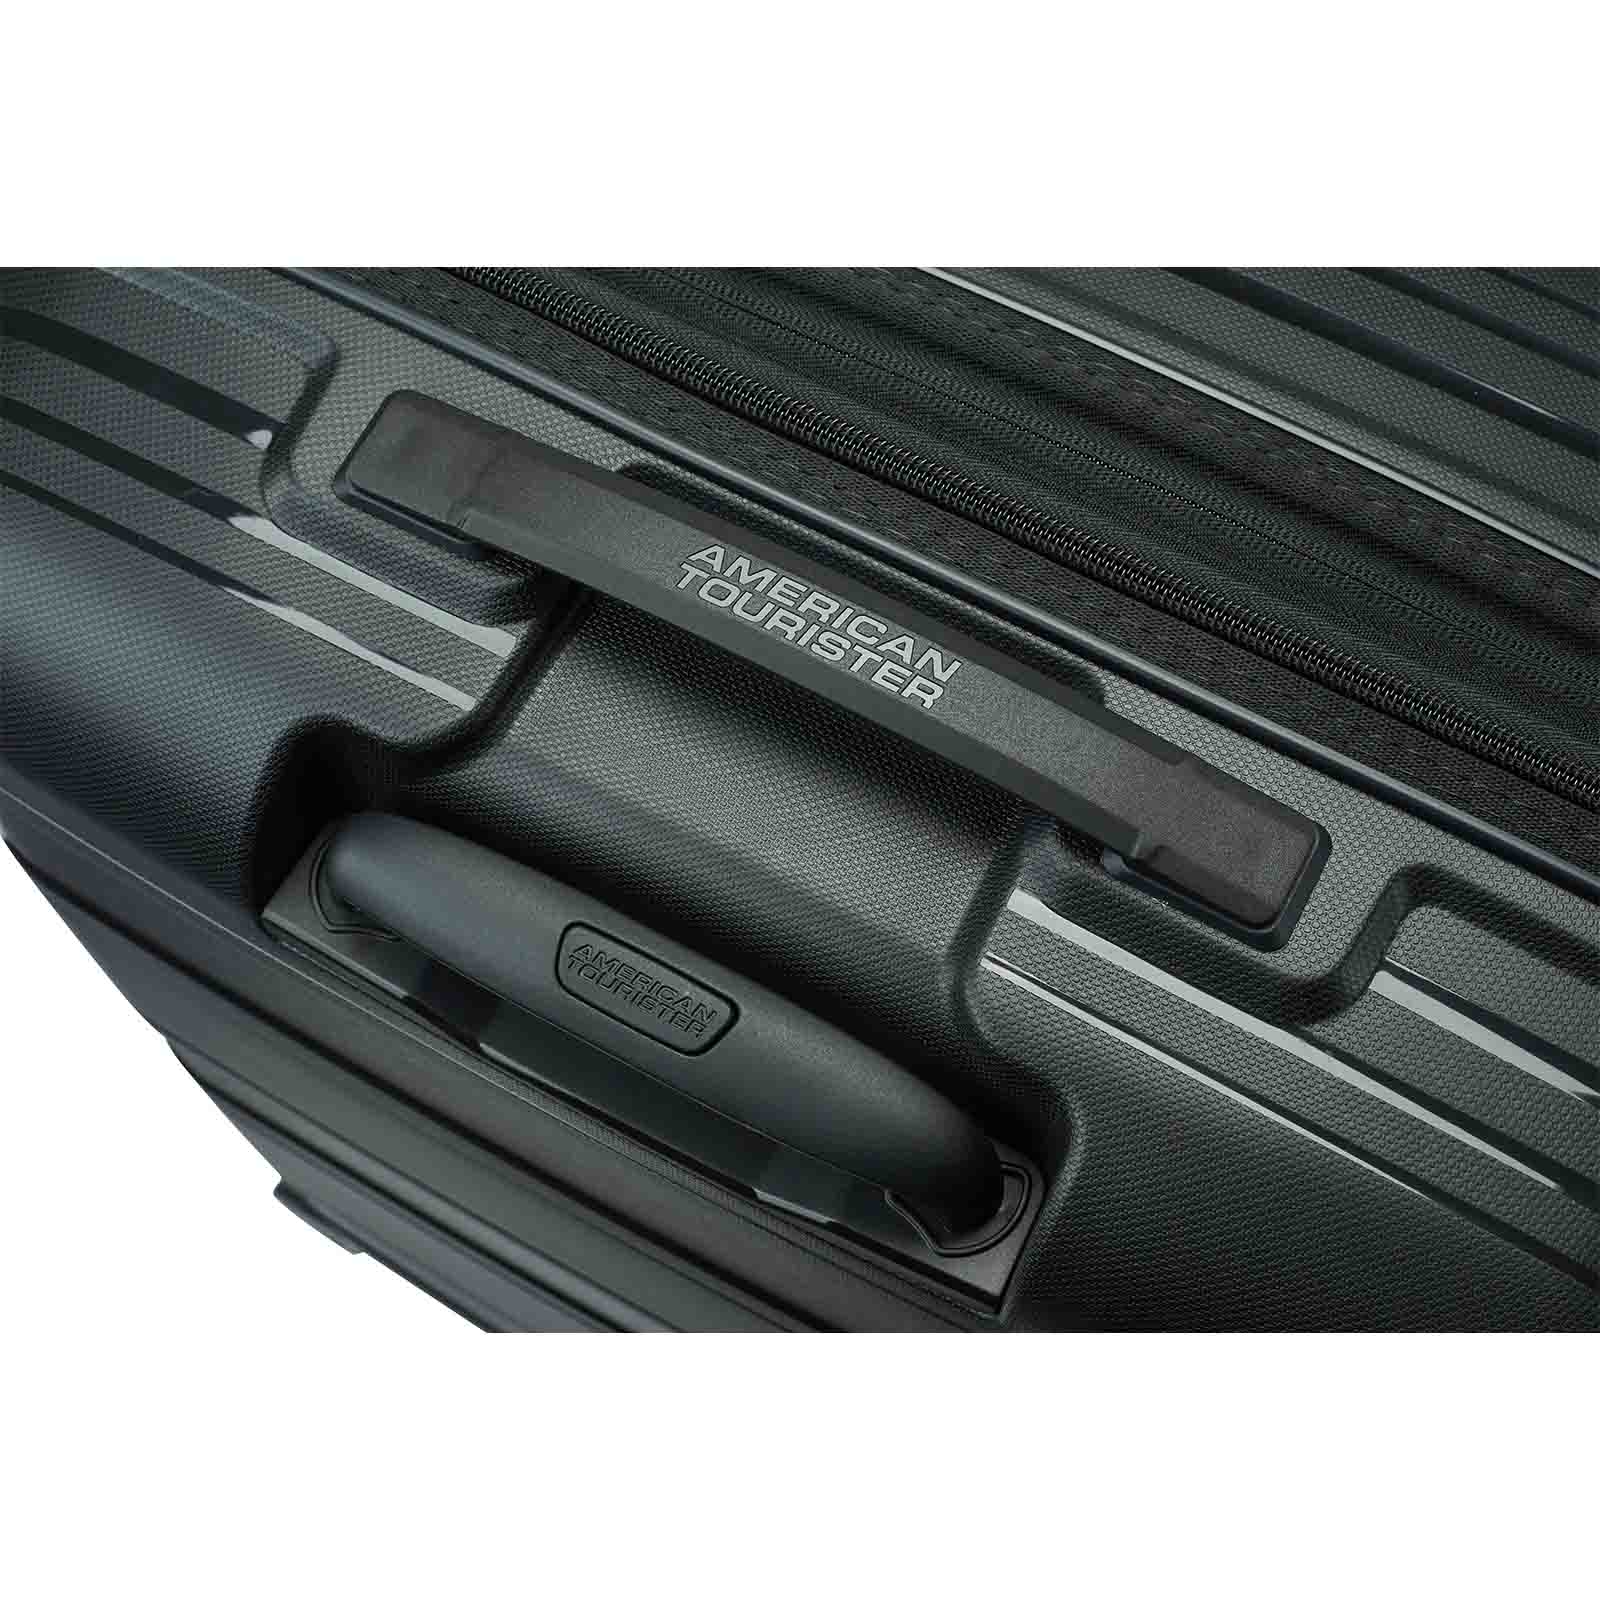 American-Tourister-Light-Max-69cm-Suitcase-Black-Trolley